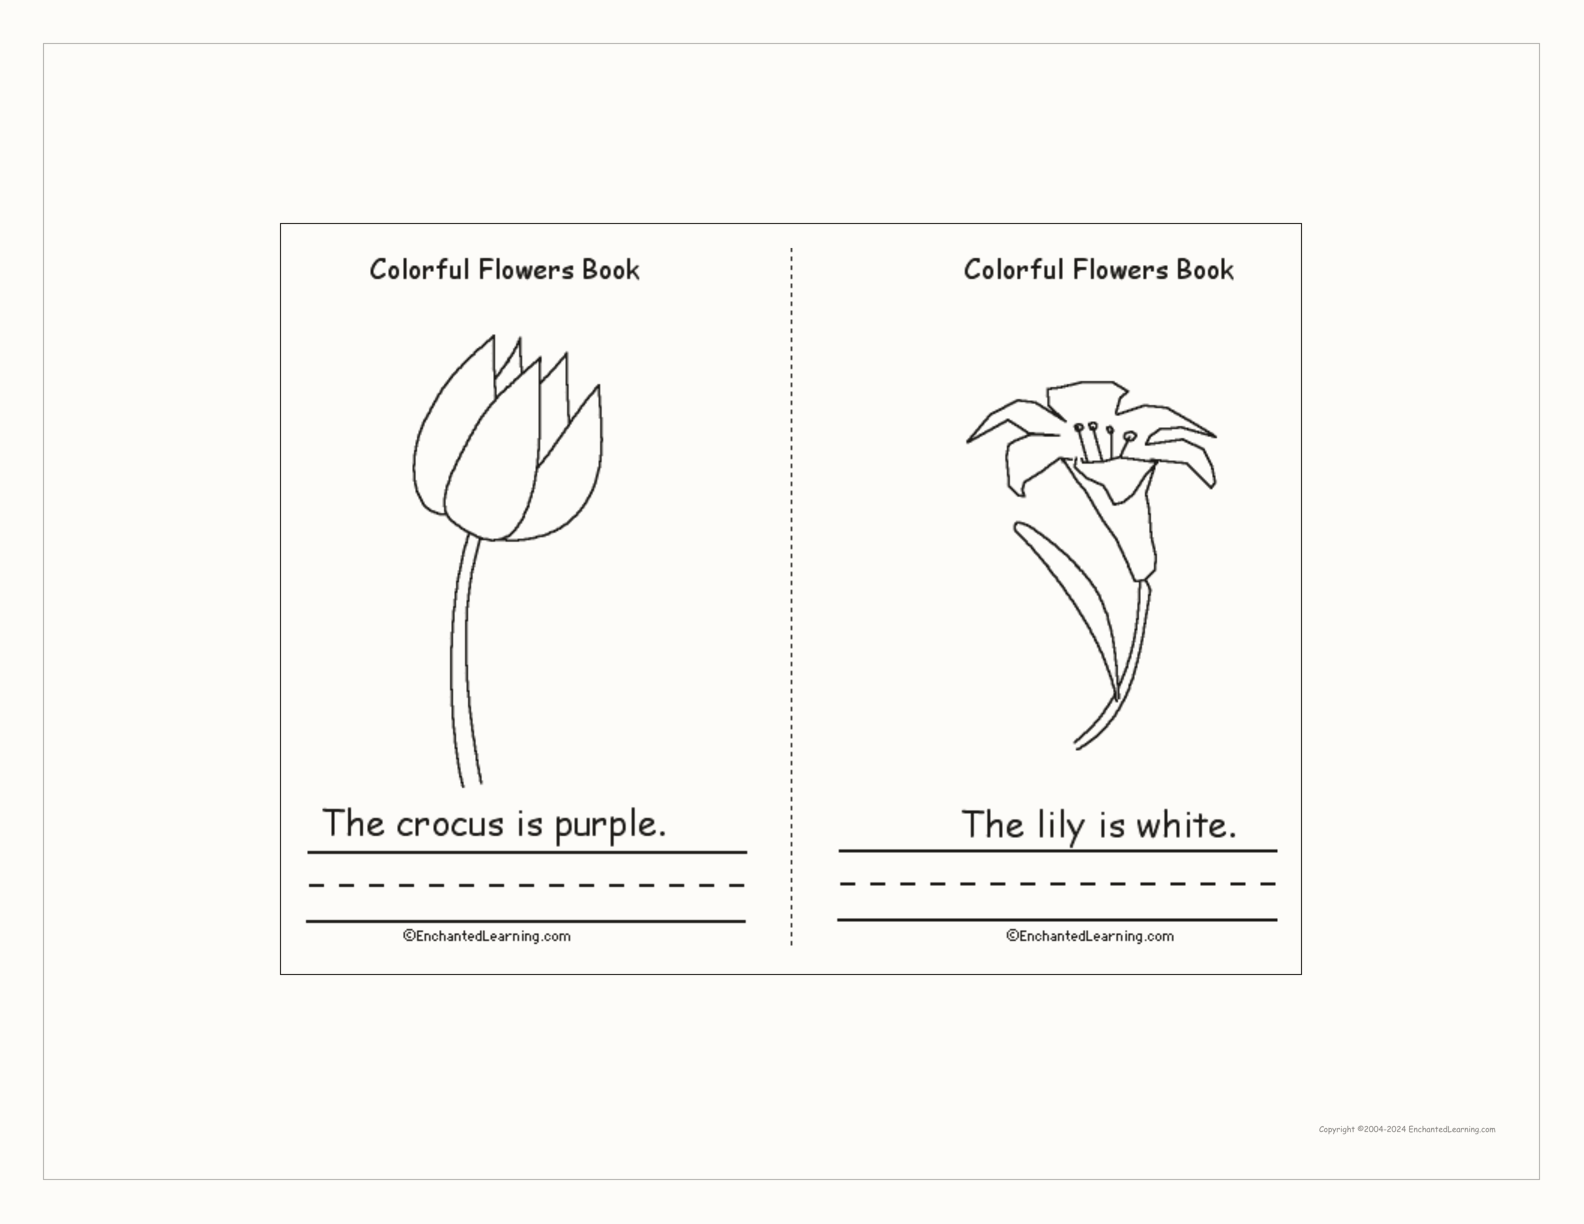 Colorful Flowers Book interactive printout page 2